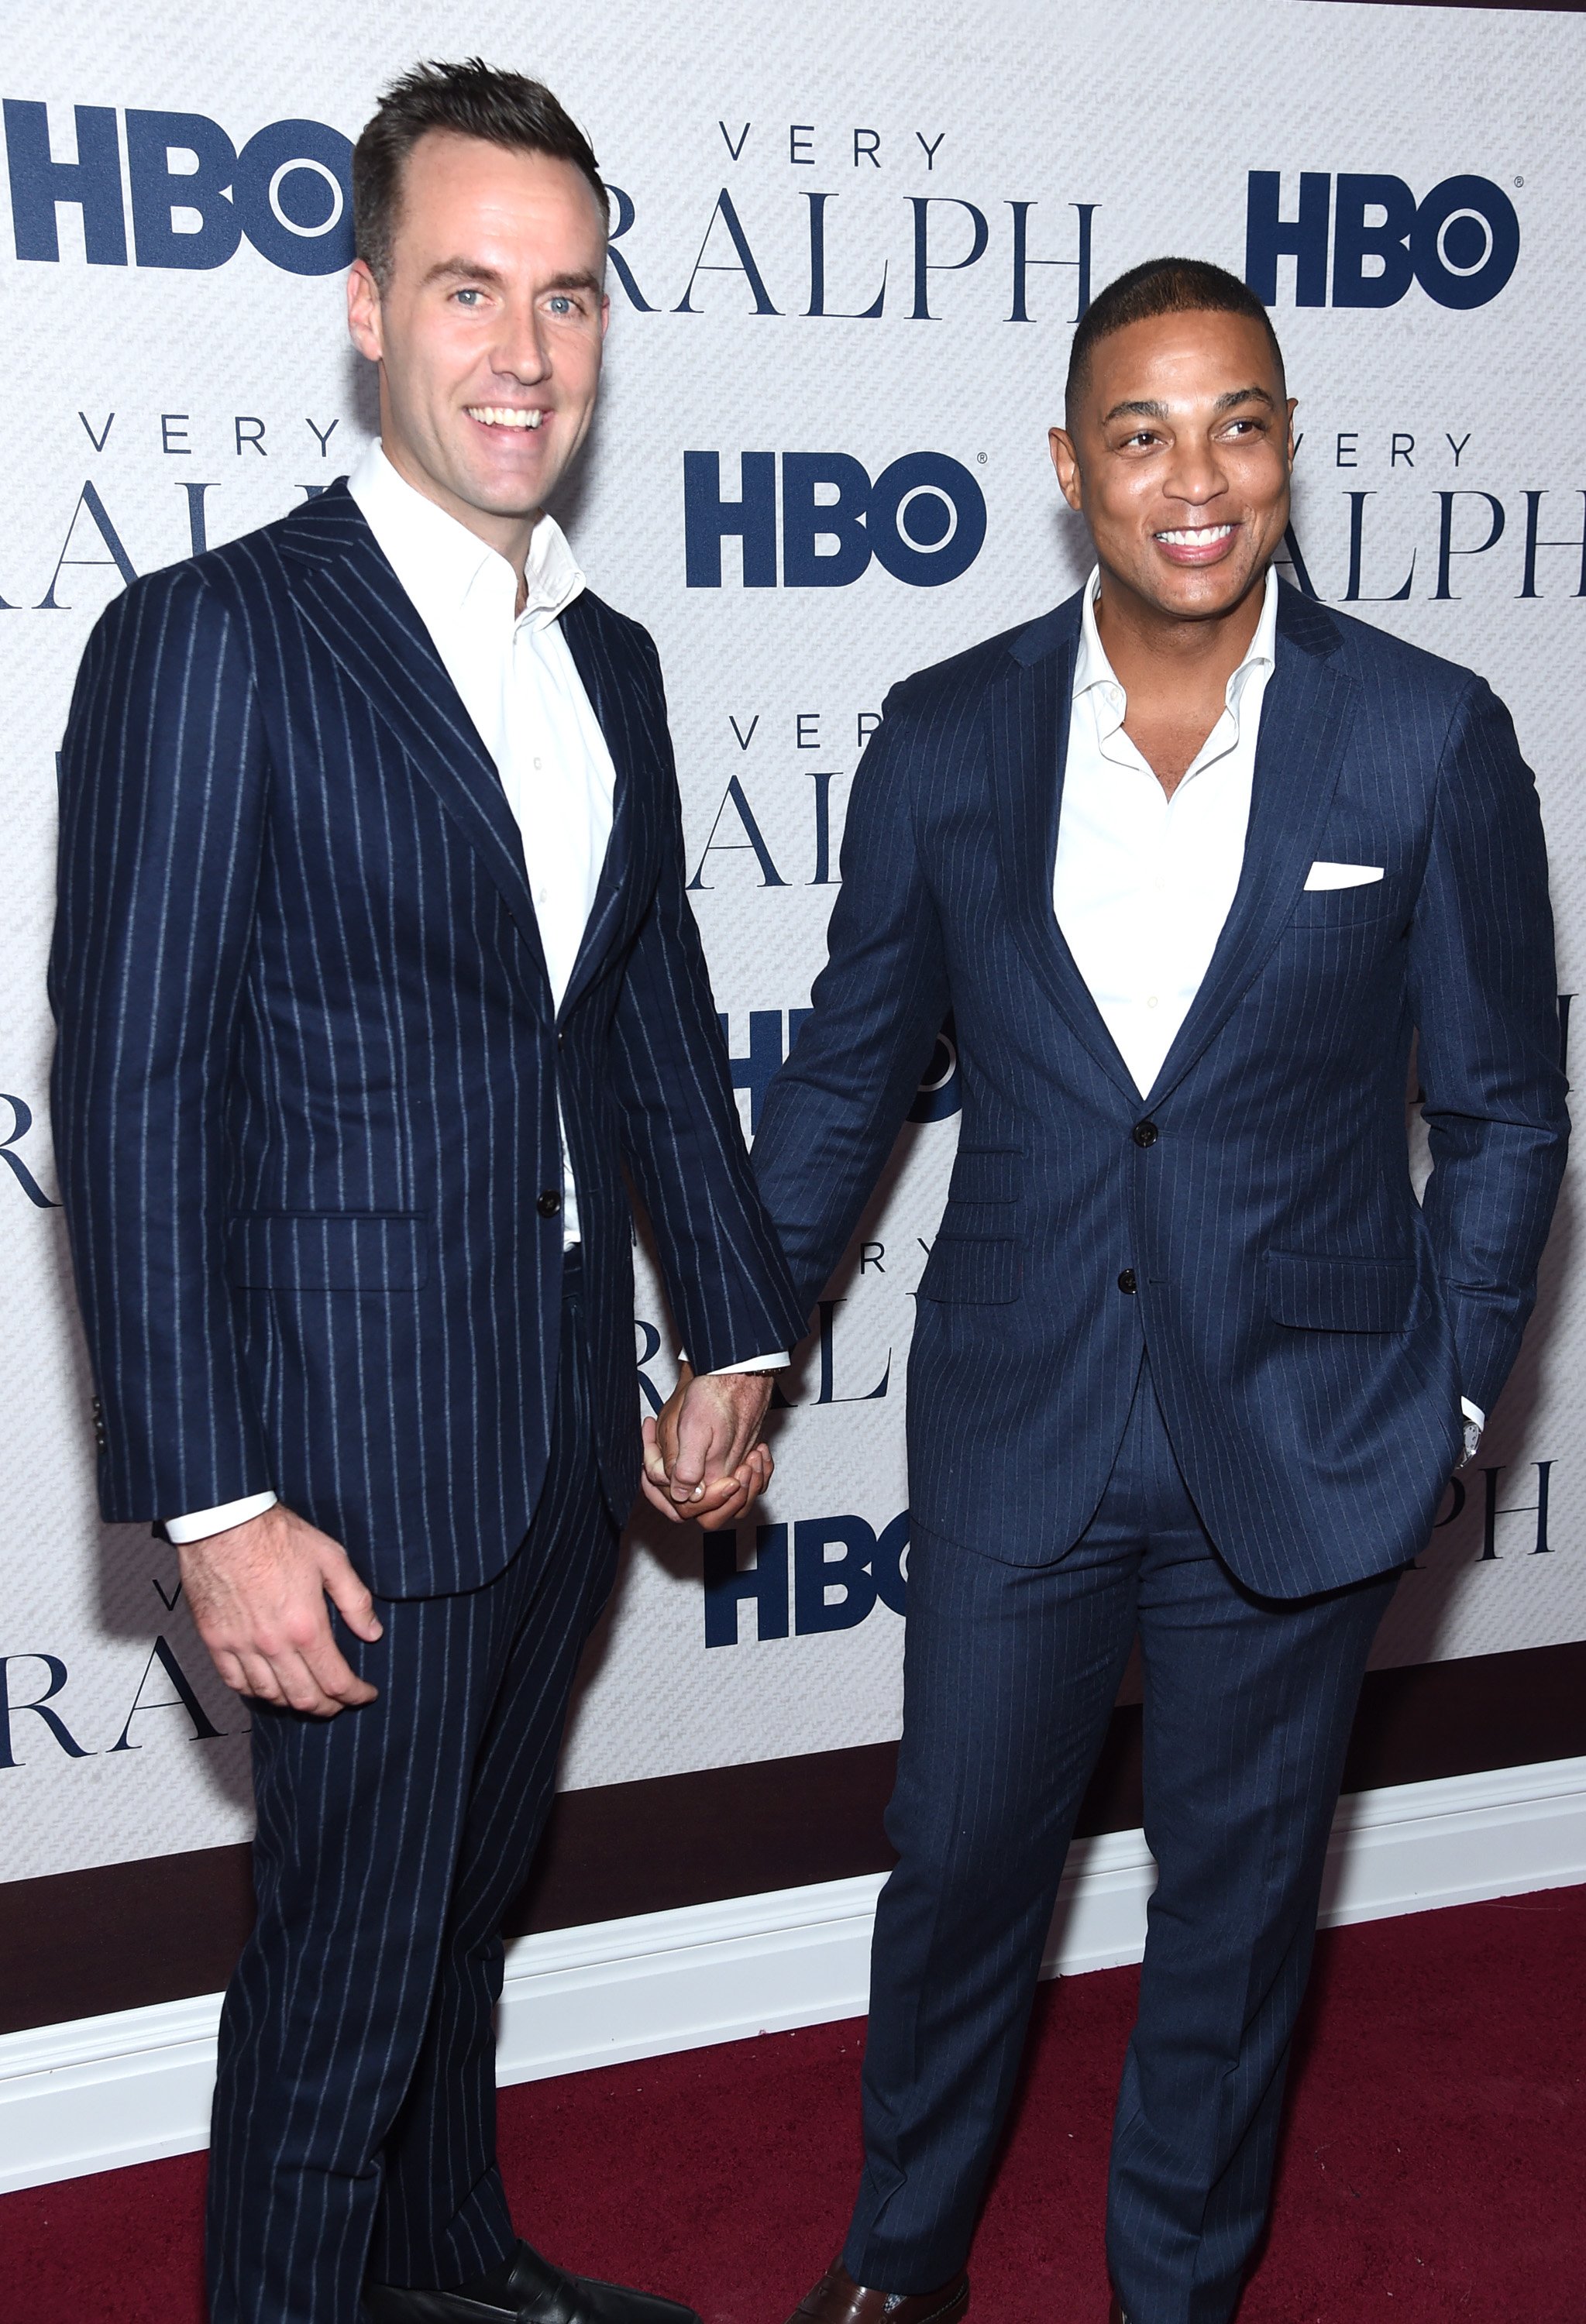 Tim Malone and Don Lemon at the HBO's "Very Ralph" World Premiere on October 23, 2019, in New York City. | Source: Getty Images